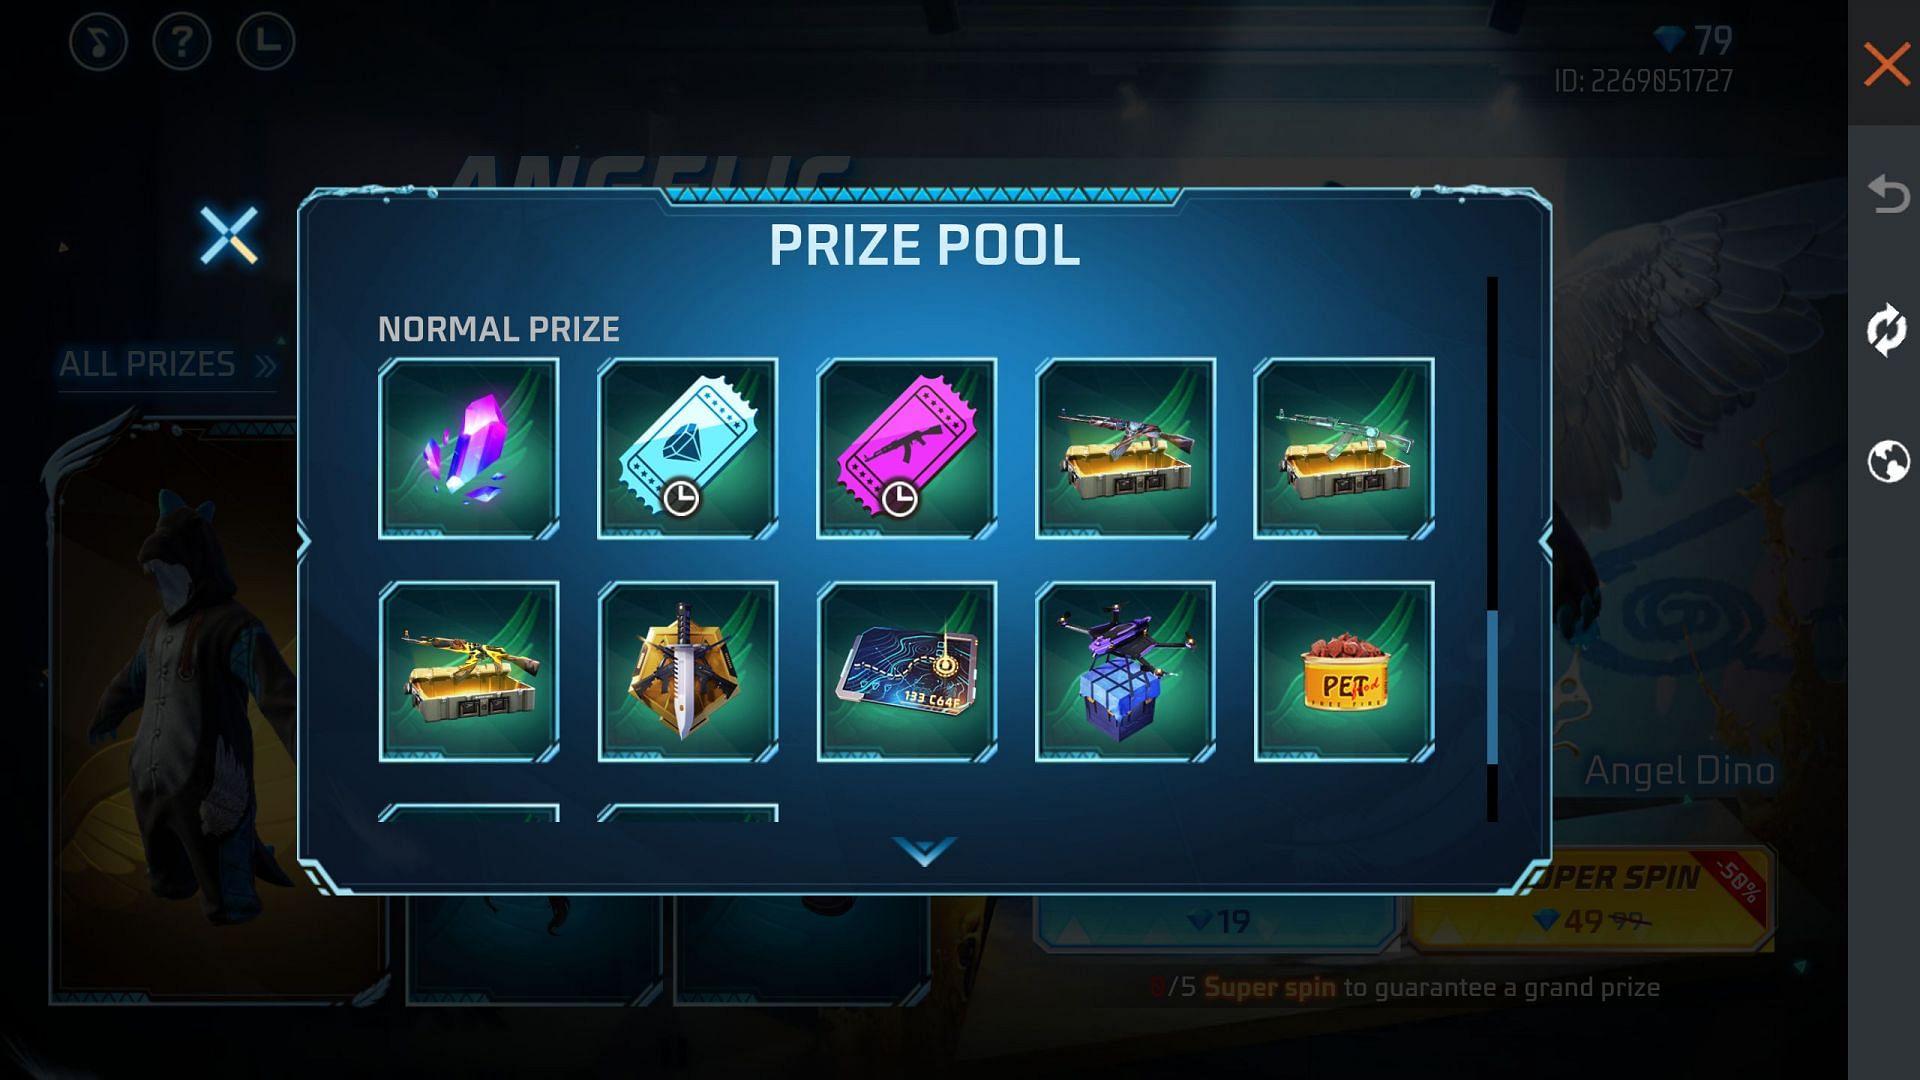 Normal prizes for the ongoing event (Image via Garena)